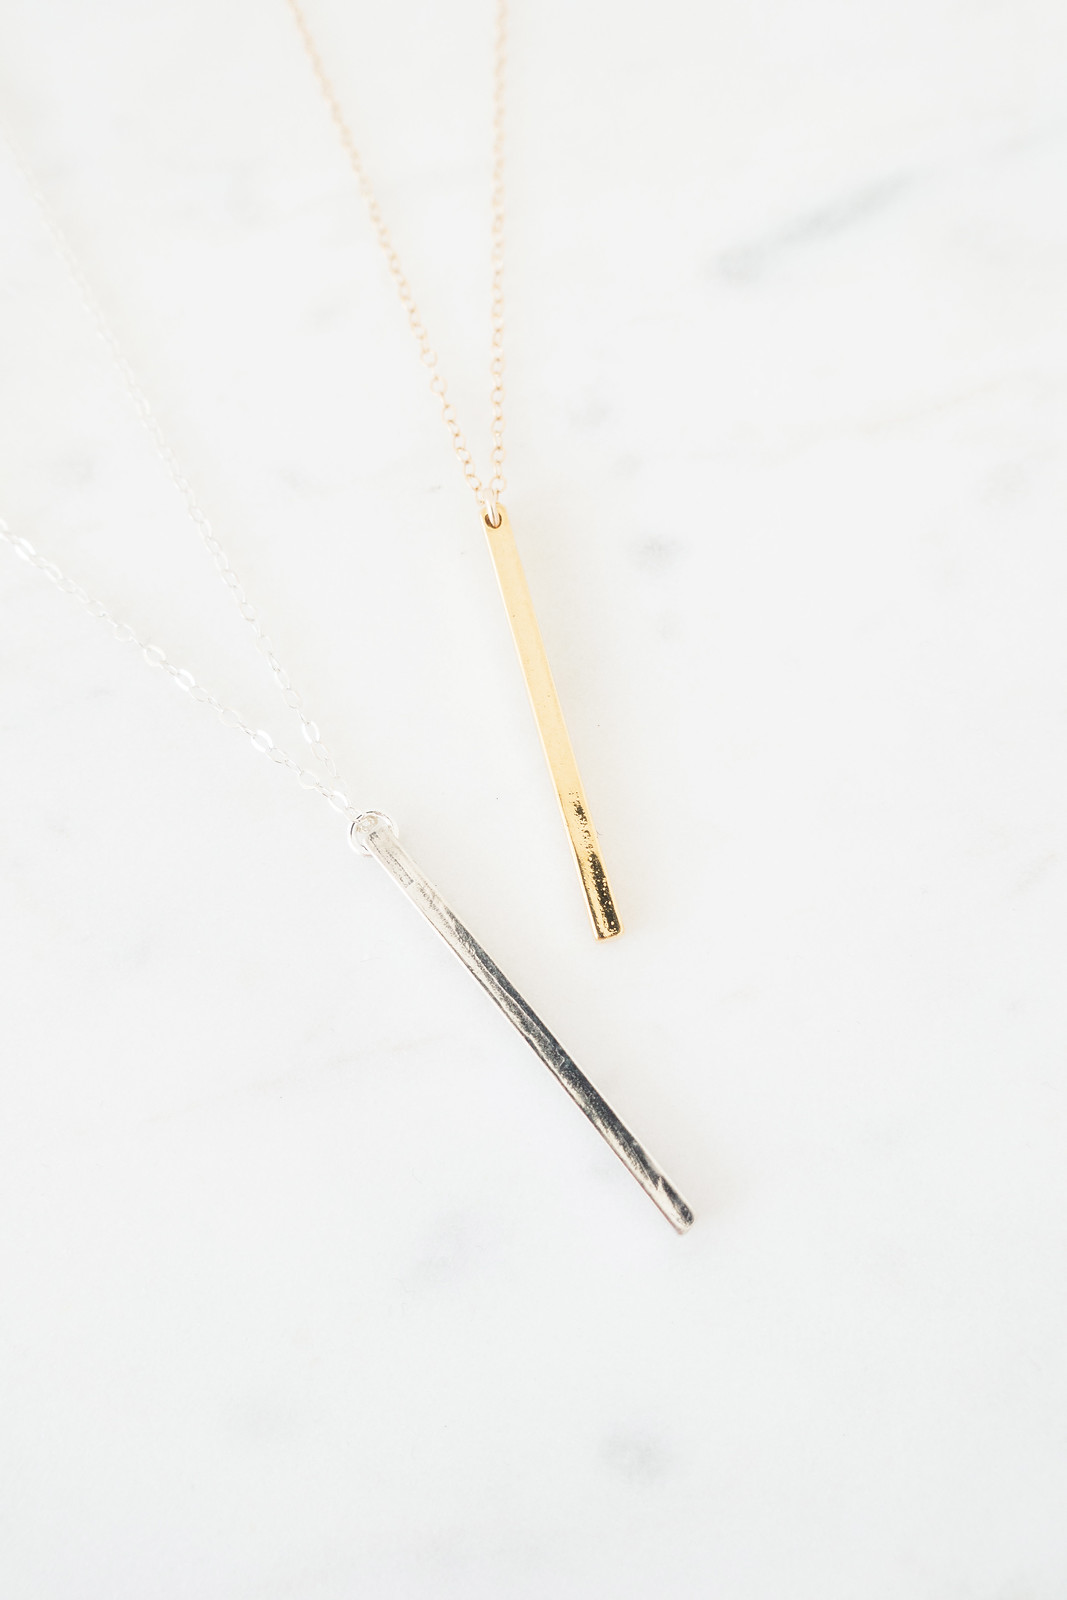 Introducing: The Bar Necklace